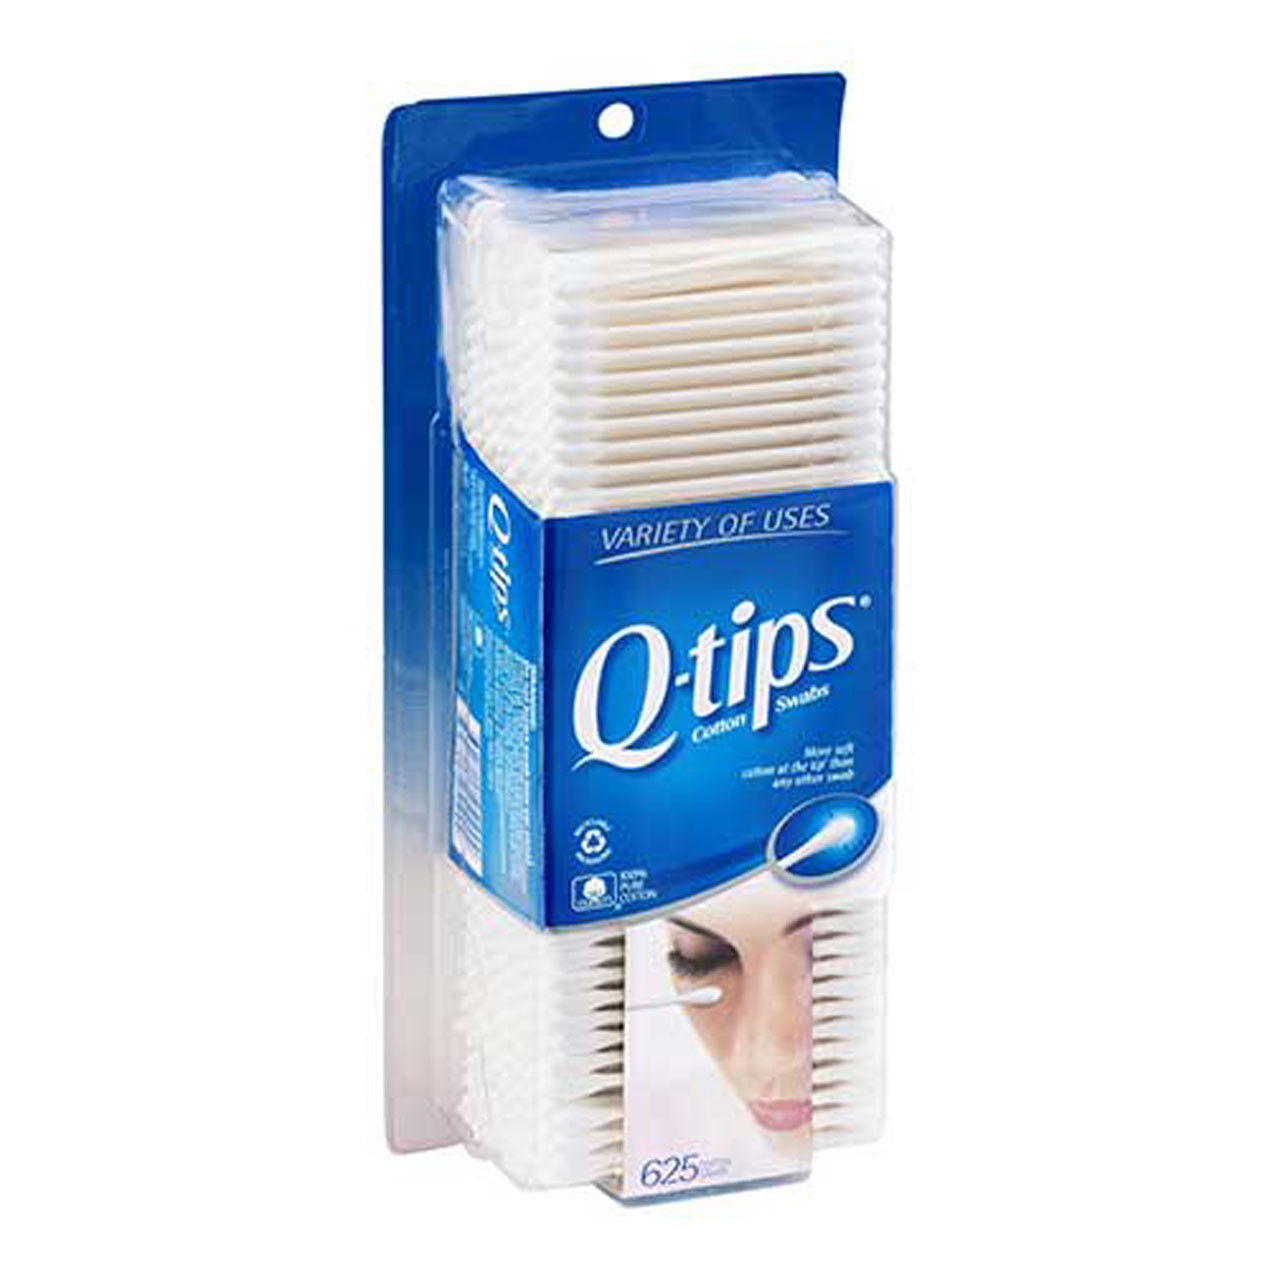 Q-Tips 100% Cotton Swabs - 6 Pack/625 Ct Questions & Answers